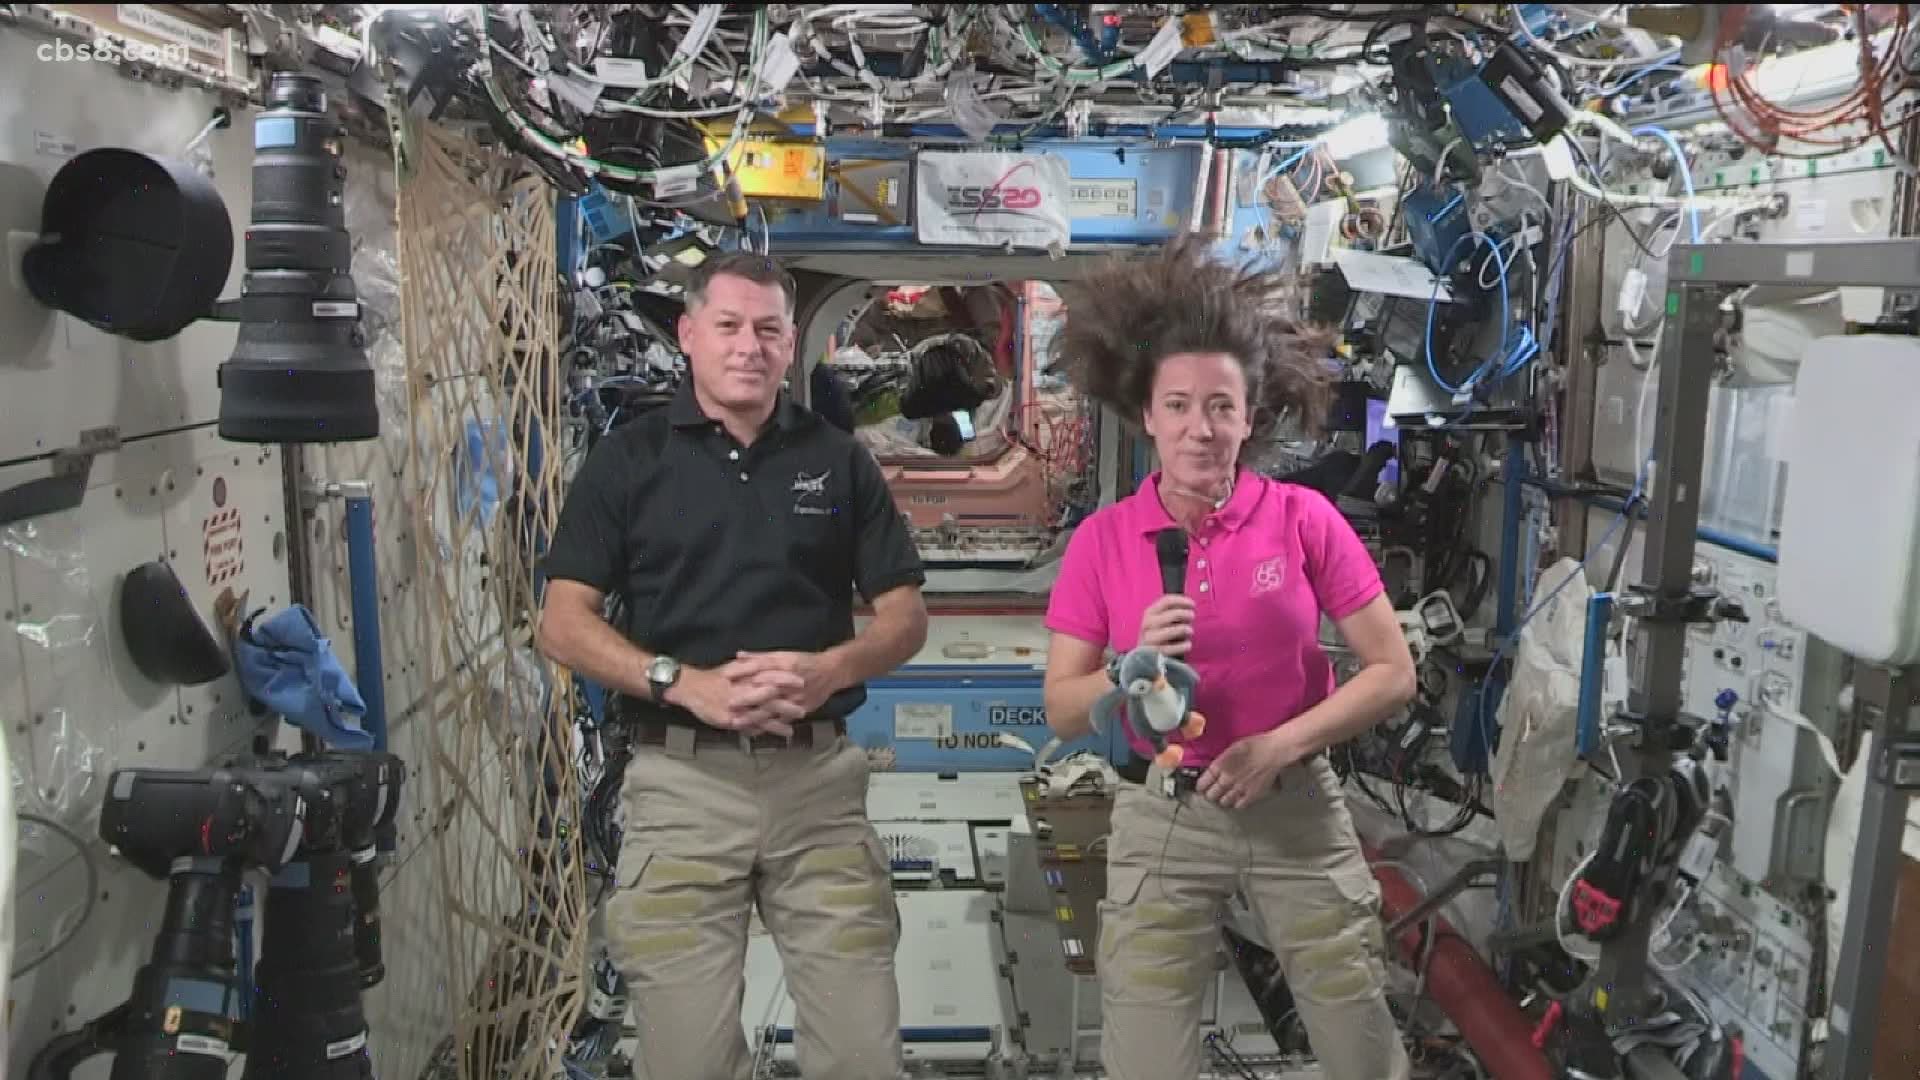 Hear from two astronauts on the International Space Station.